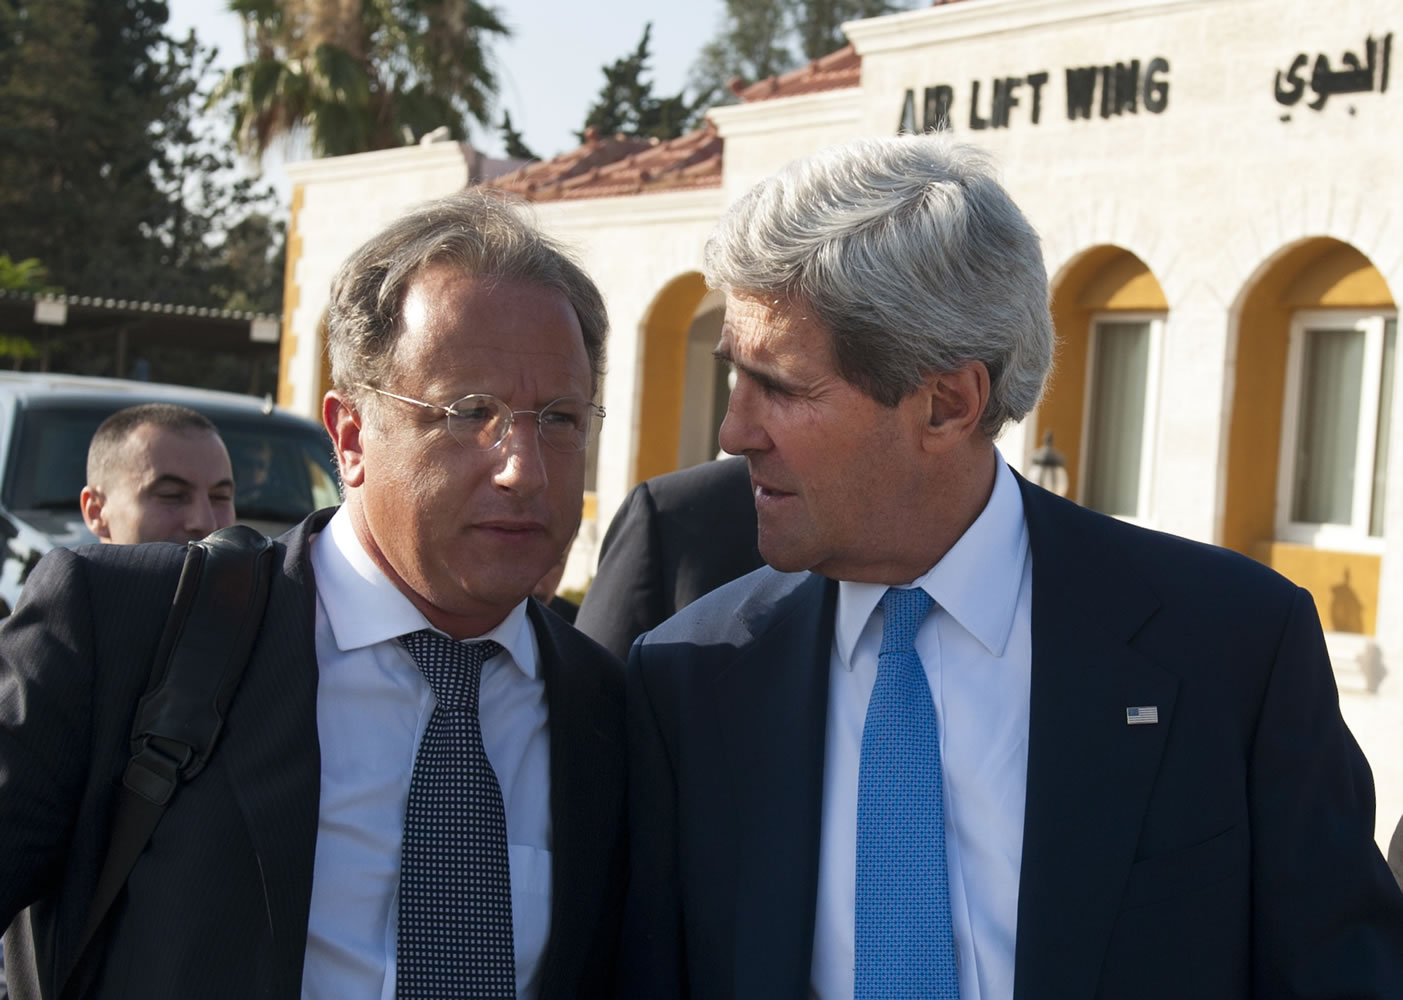 Secretary of State John Kerry, right, chats with Deputy Special Envoy for Middle East Peace Frank Lowenstein while walking to board a flight on July 19 in Amman, Jordan.